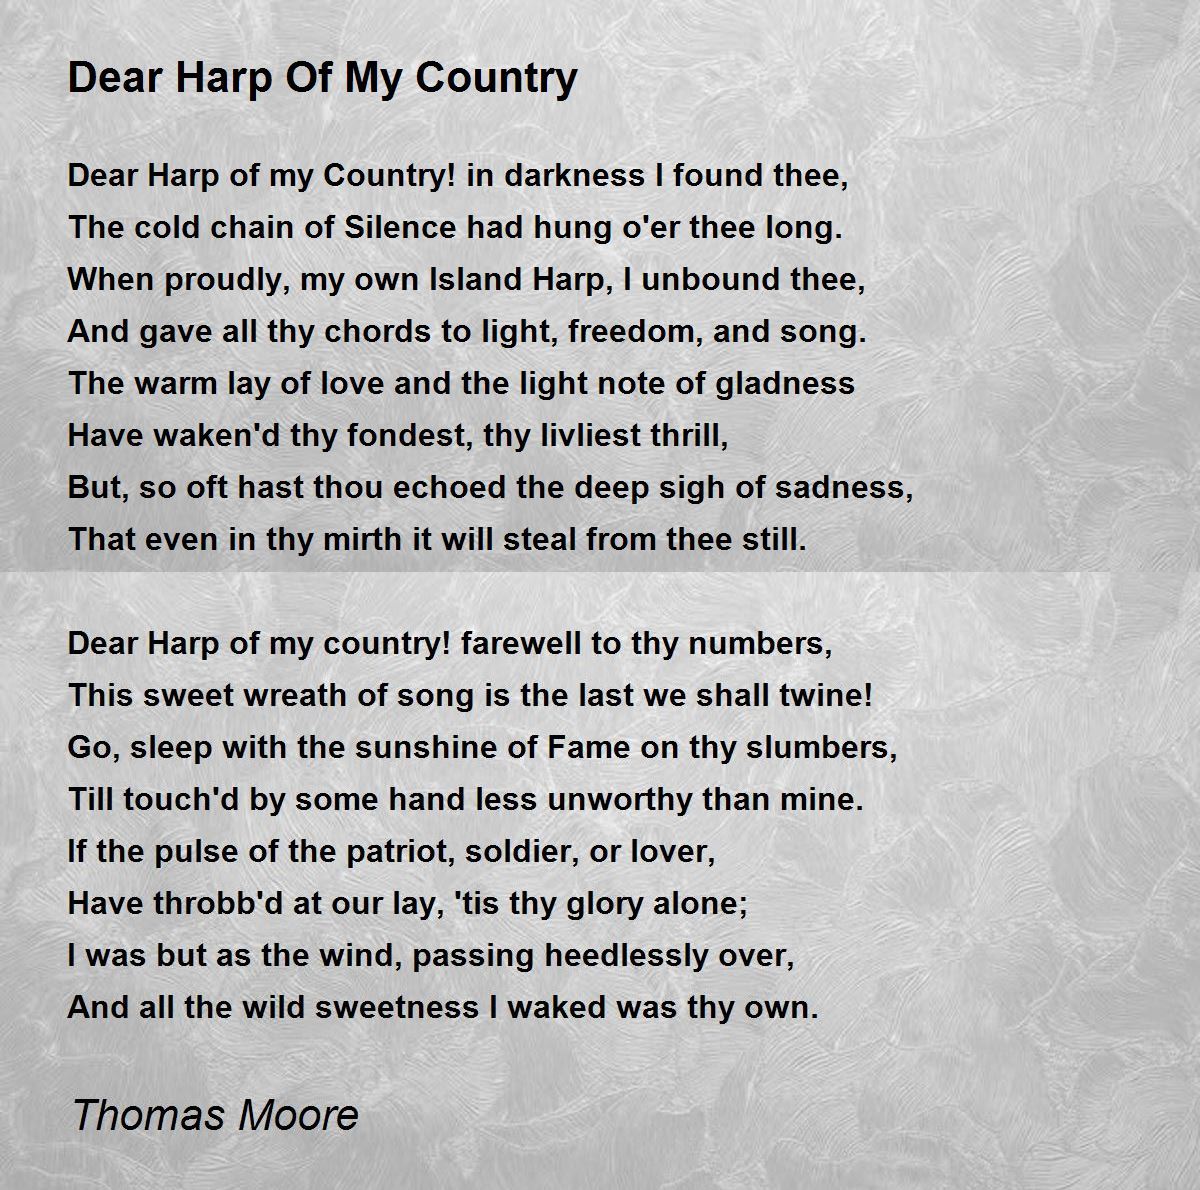 Dear Harp Of My Country Poem by Thomas Moore - Poem Hunter